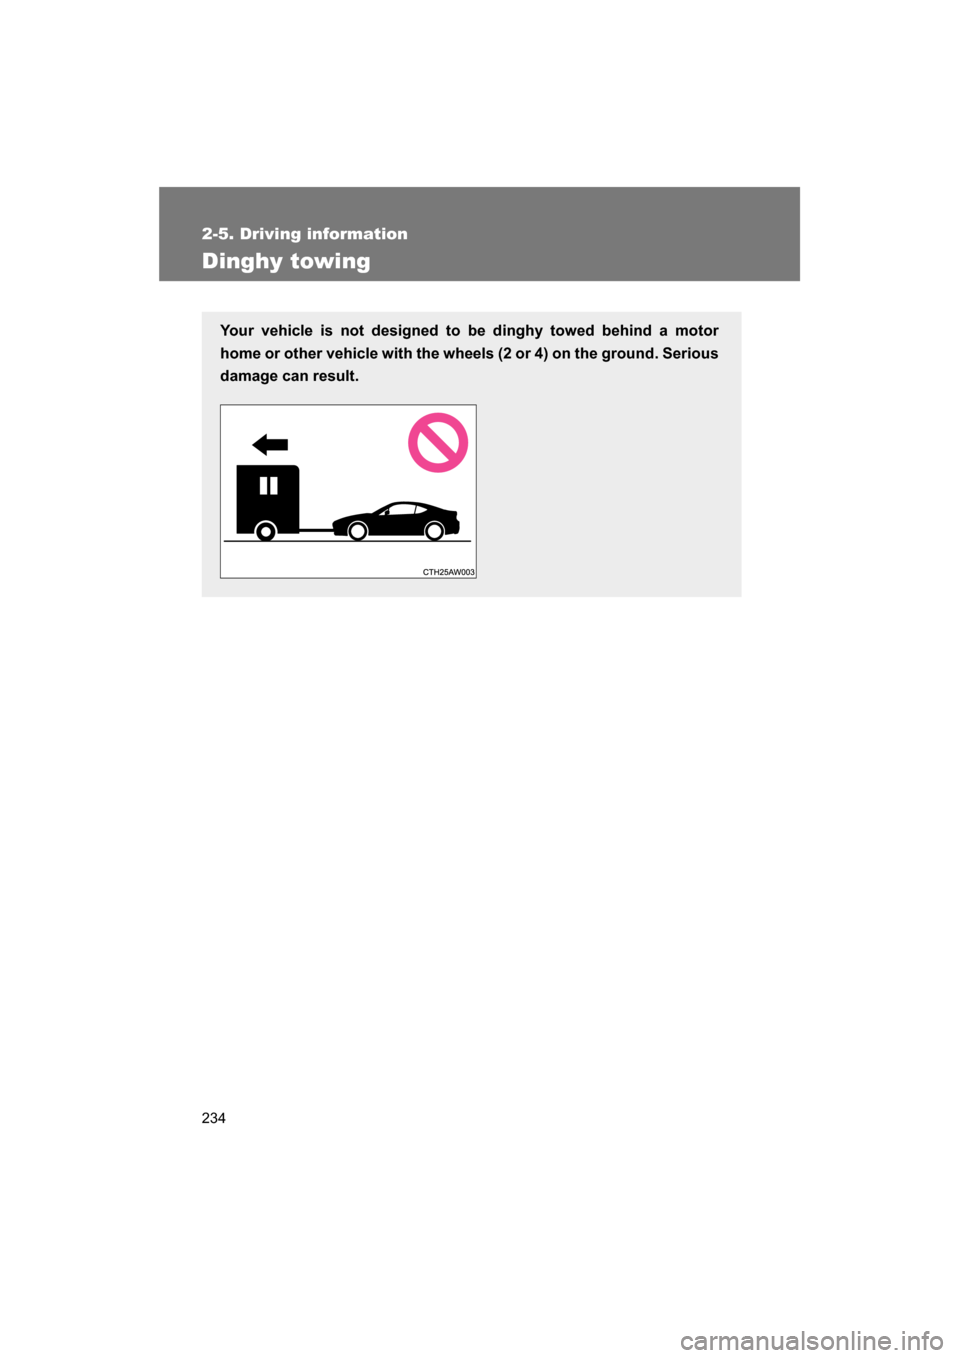 SUBARU BRZ 2014 1.G Owners Manual 234
2-5. Driving information
Dinghy towing
Your vehicle is not designed to be dinghy towed behind a motor 
home or other vehicle with the wheels (2 or 4) on the ground. Serious
damage can result.  